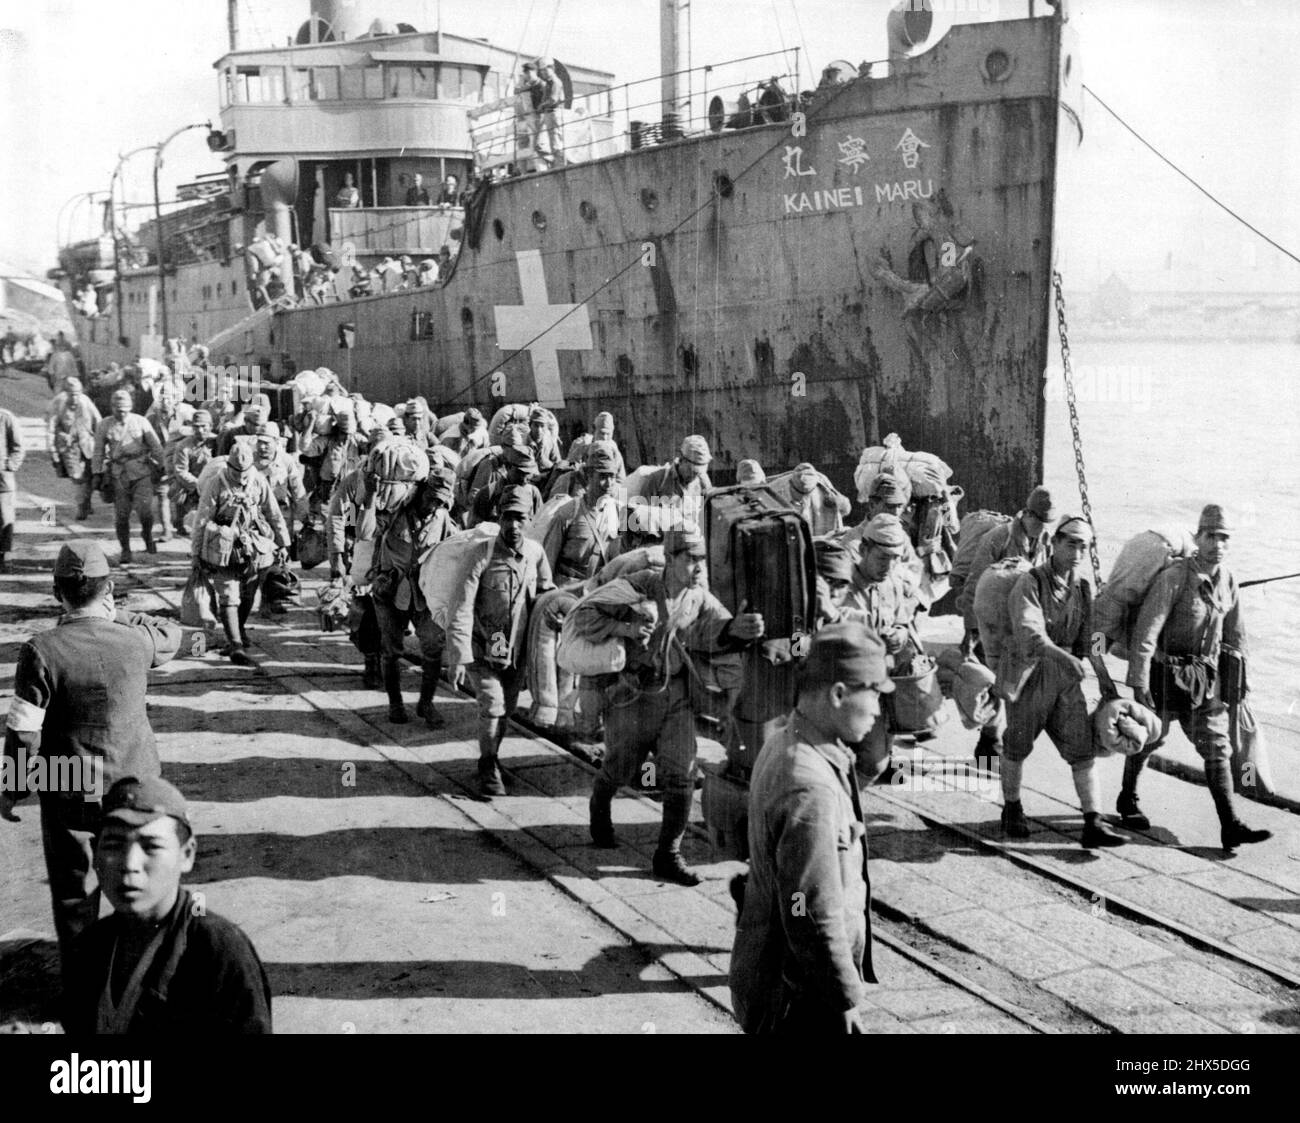 Japanese Troops Return from Korea -- After leaving the ship 'Kainei Maru' which has brought them from Korea, Japanese troops are shown marching along dock enroute to Darwin at Hakata, Fukuoka Perfecture, Hyushu, Japan, which will take demobilized men. October 21, 1945. (Photo by U.S. Army Photo). Stock Photo